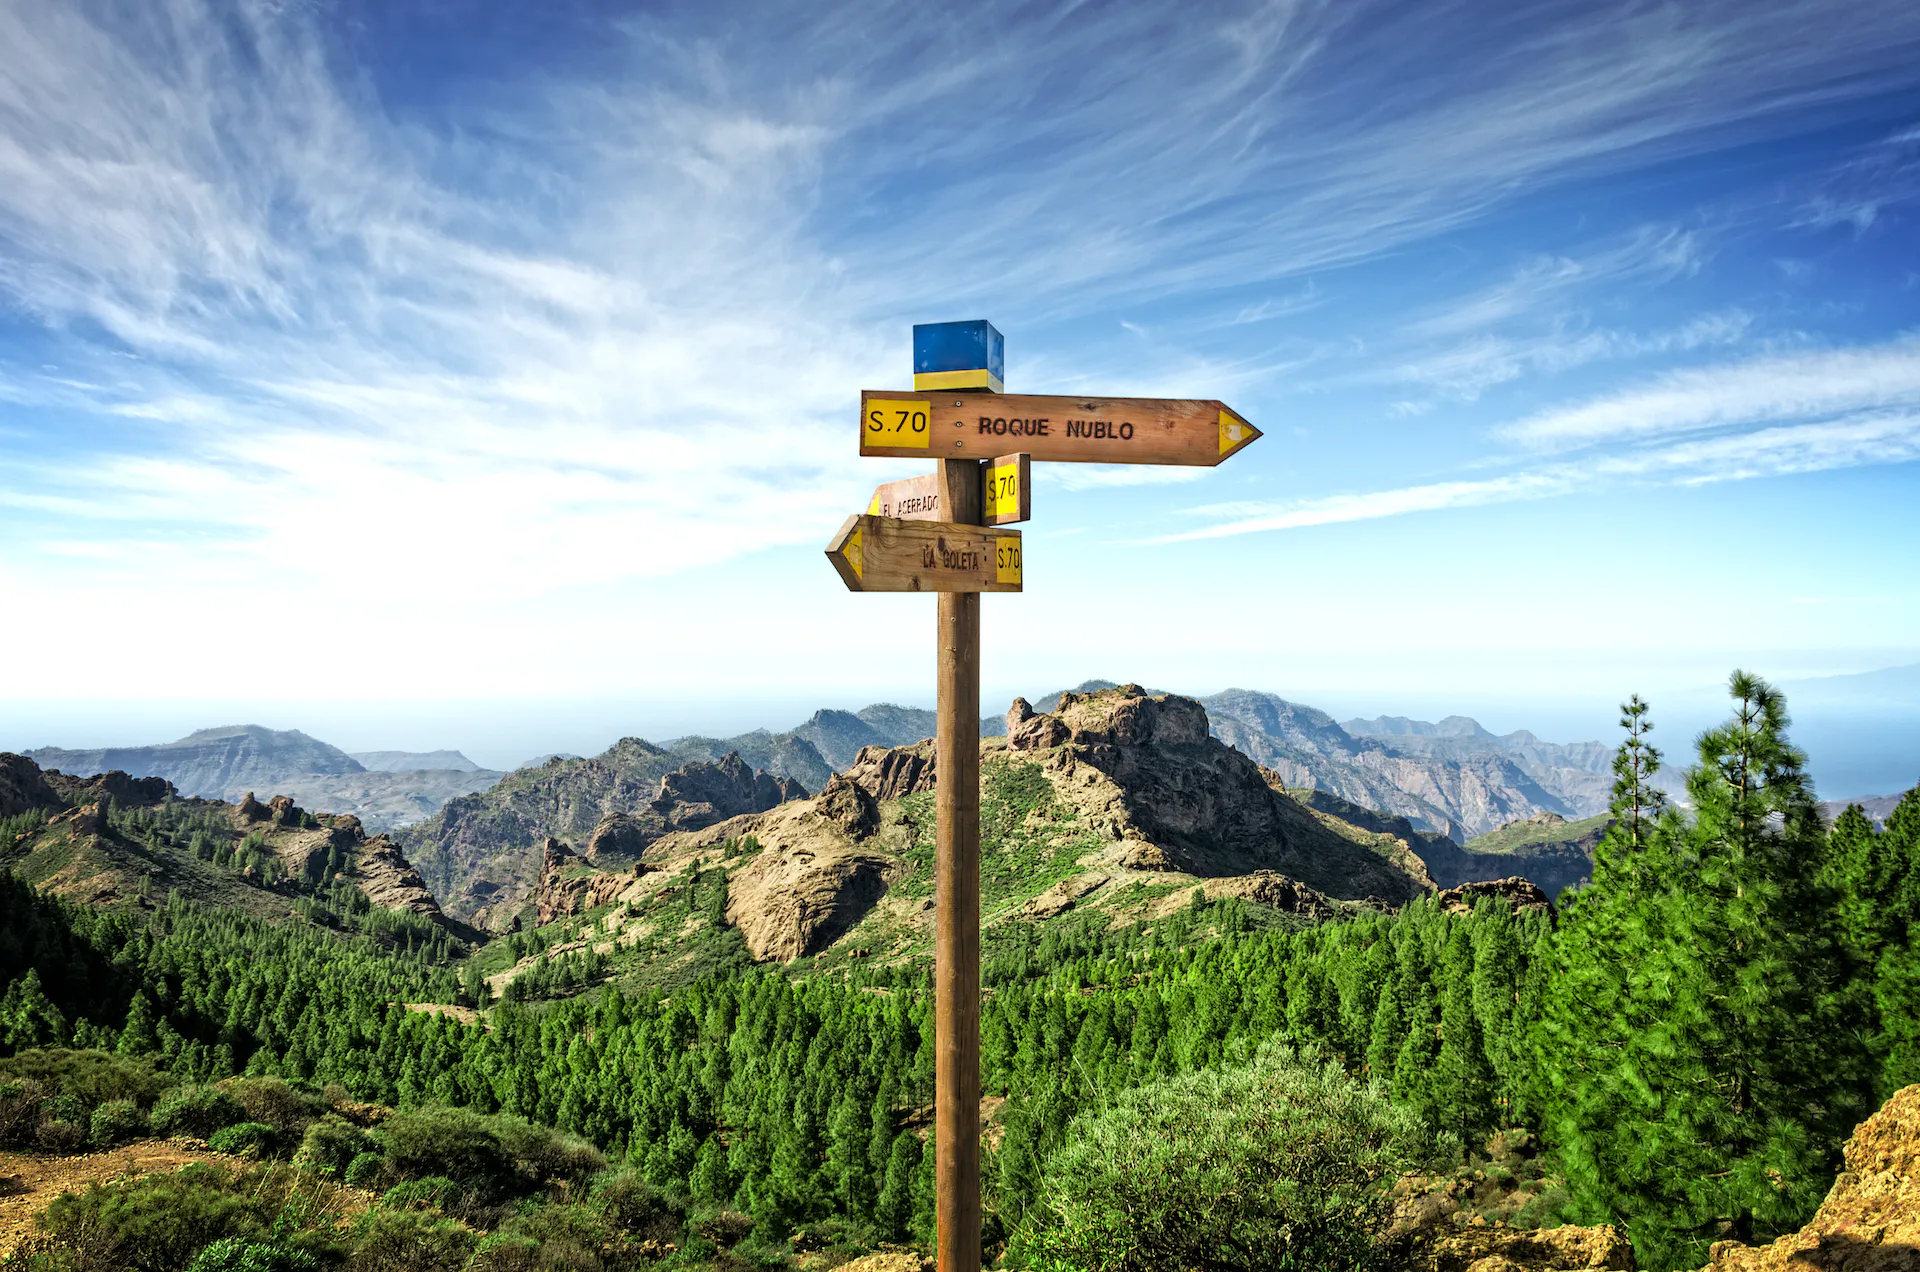 Signpost for hikers' paths in front of rocky, forested terrain in Gran Canaria, Canary Islands